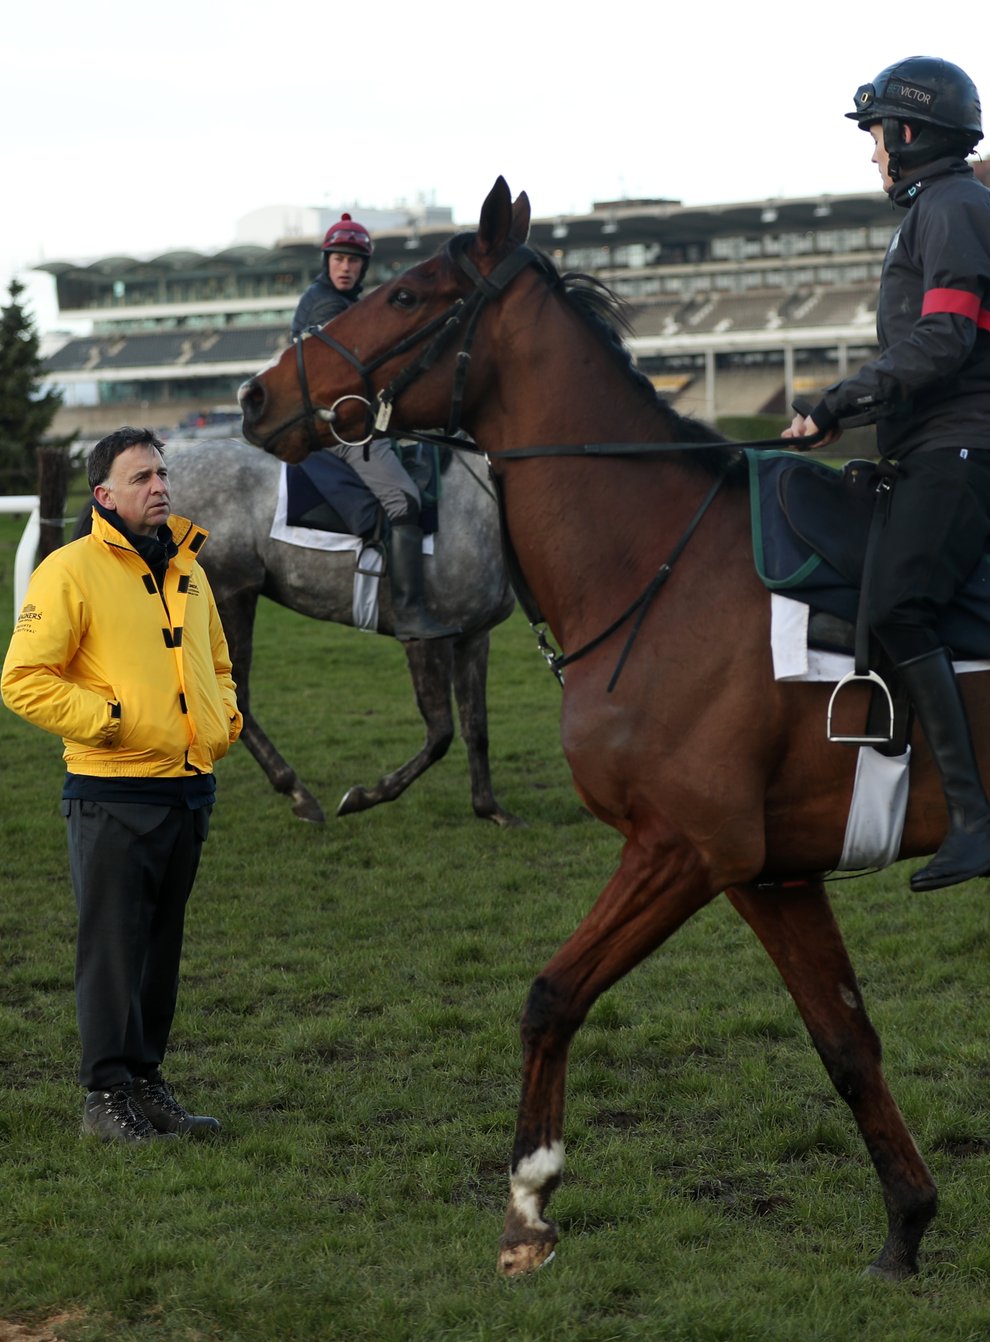 Monalee with Rachael Blackmore and trainer Henry de Bromhead at Cheltenham on Gold Cup day